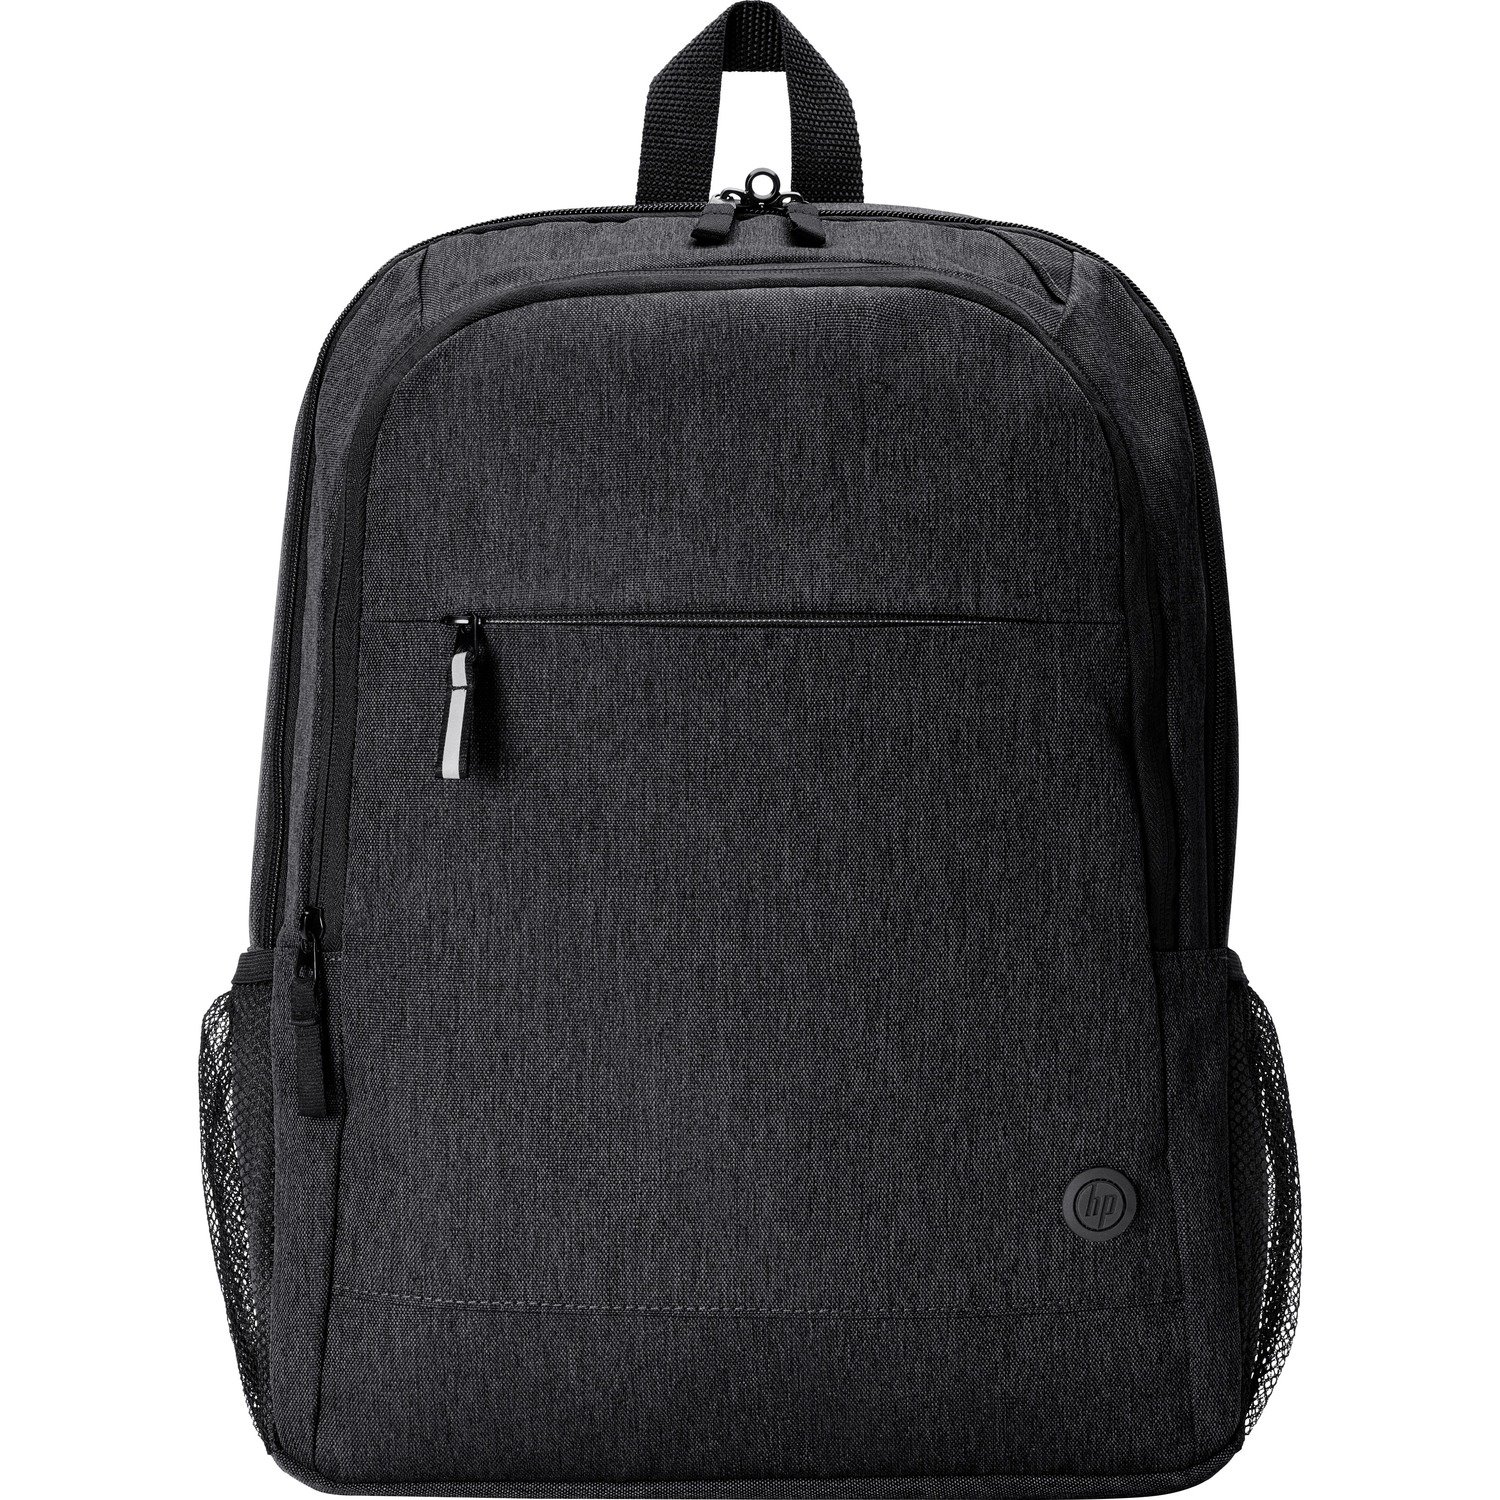 HP Prelude Pro Carrying Case (Backpack) for 15.6" Notebook, Accessories, Document - Charcoal